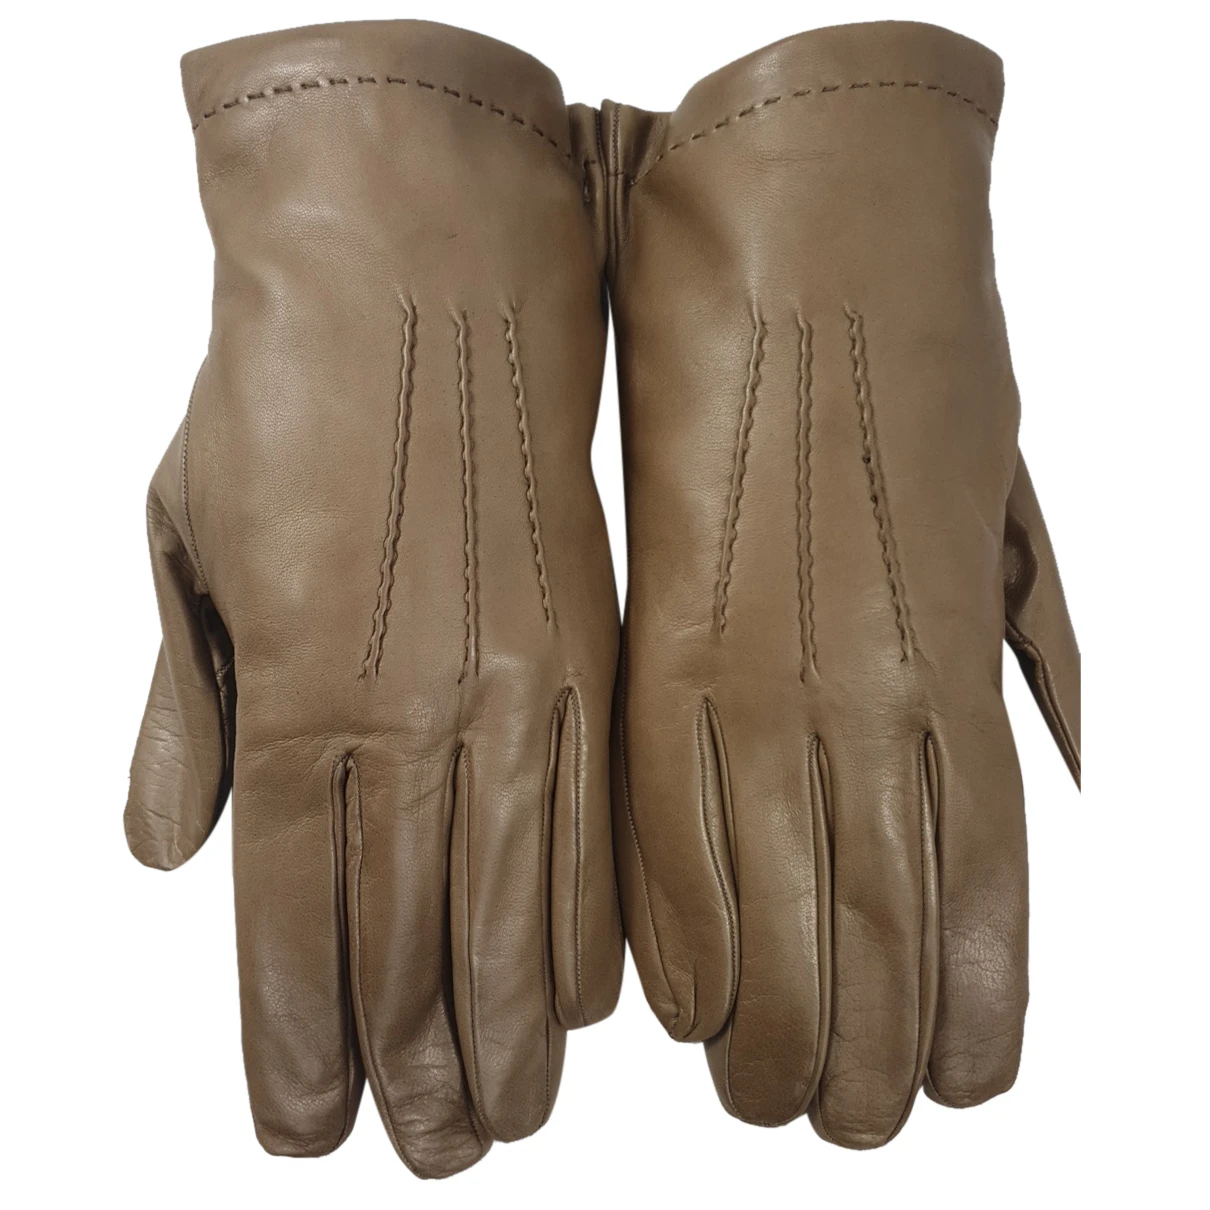 accessories Autre Marque gloves for Male Leather 8.5 - 9 Inches. Used condition